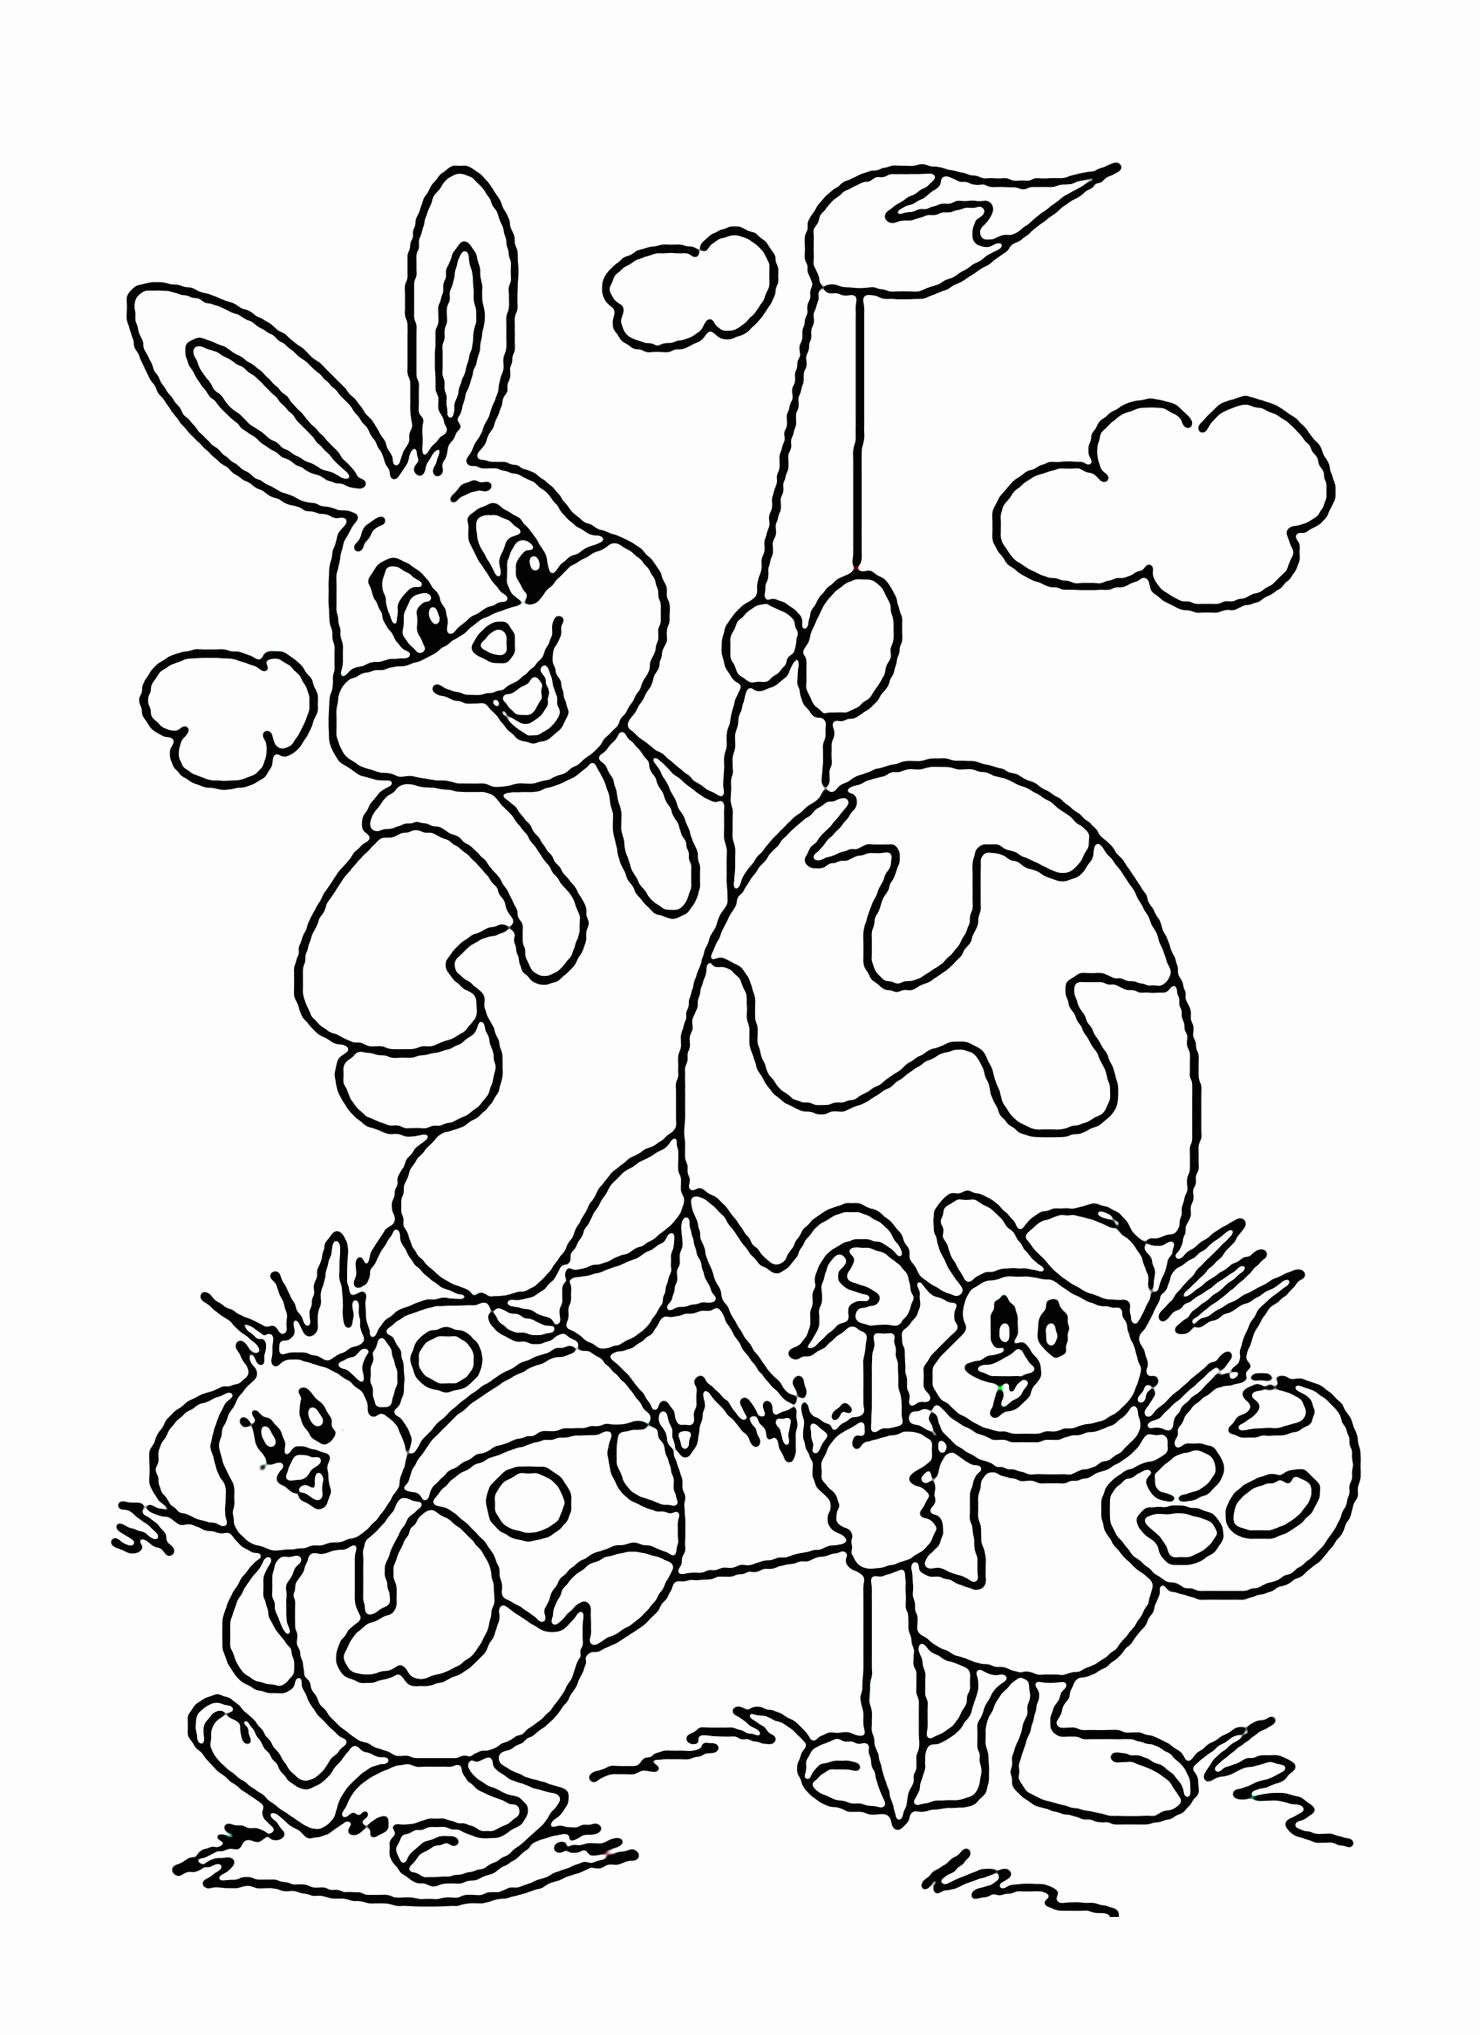 Download 15 Printable Easter Coloring Pages - Holiday Vault